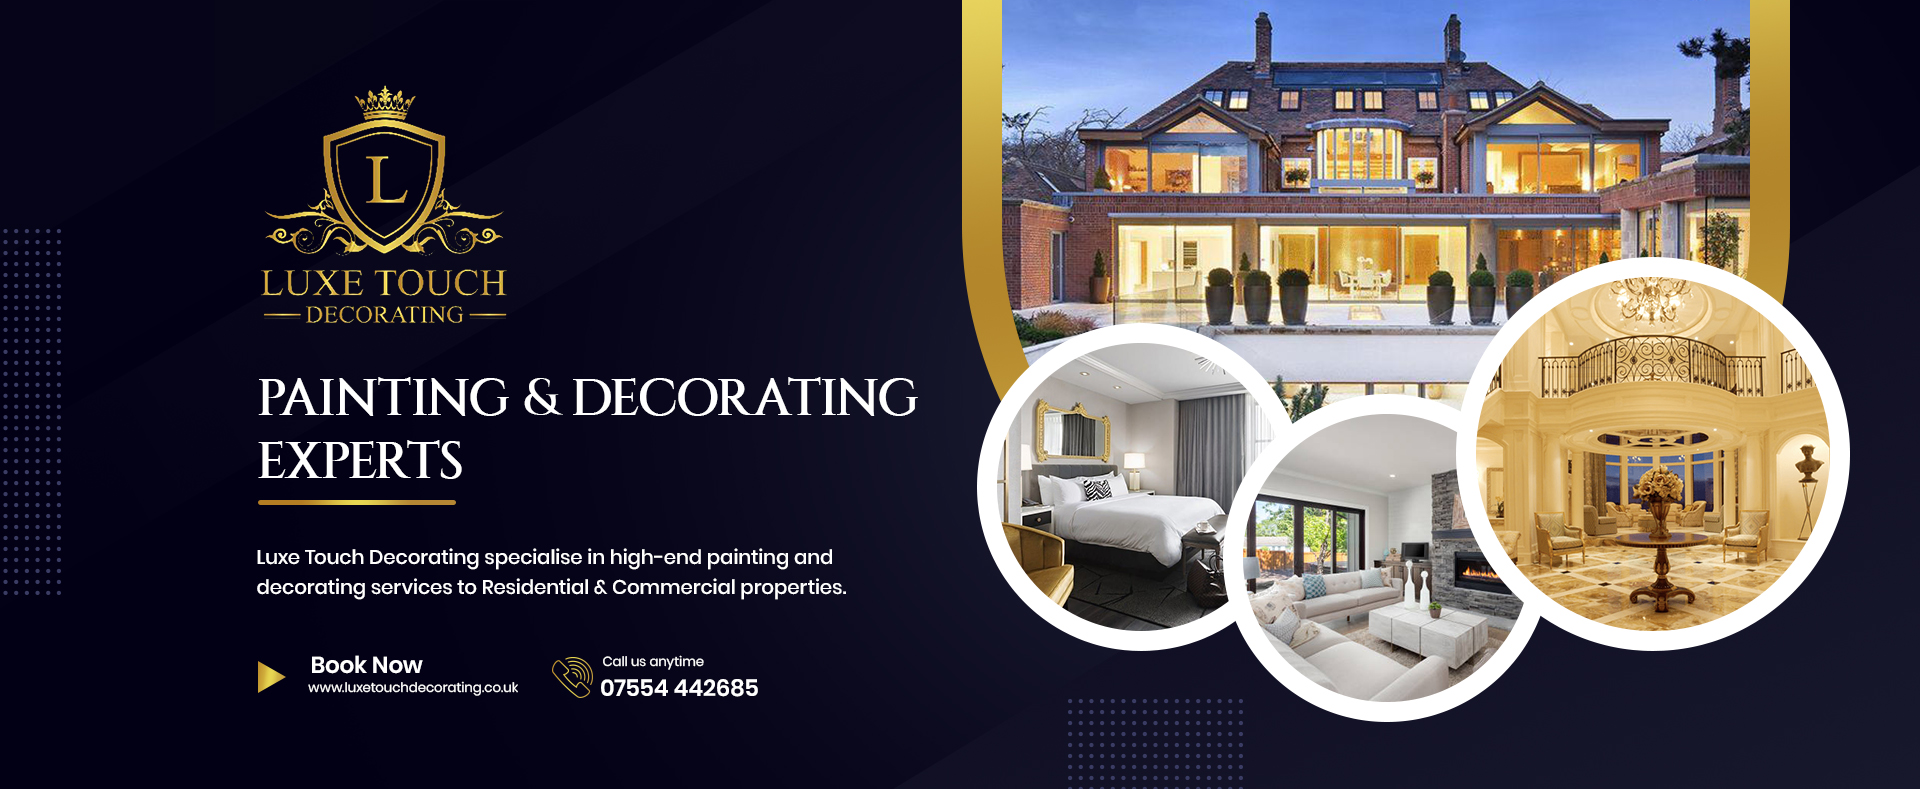 Luxe Touch Decorating – Painting & Decorating Experts